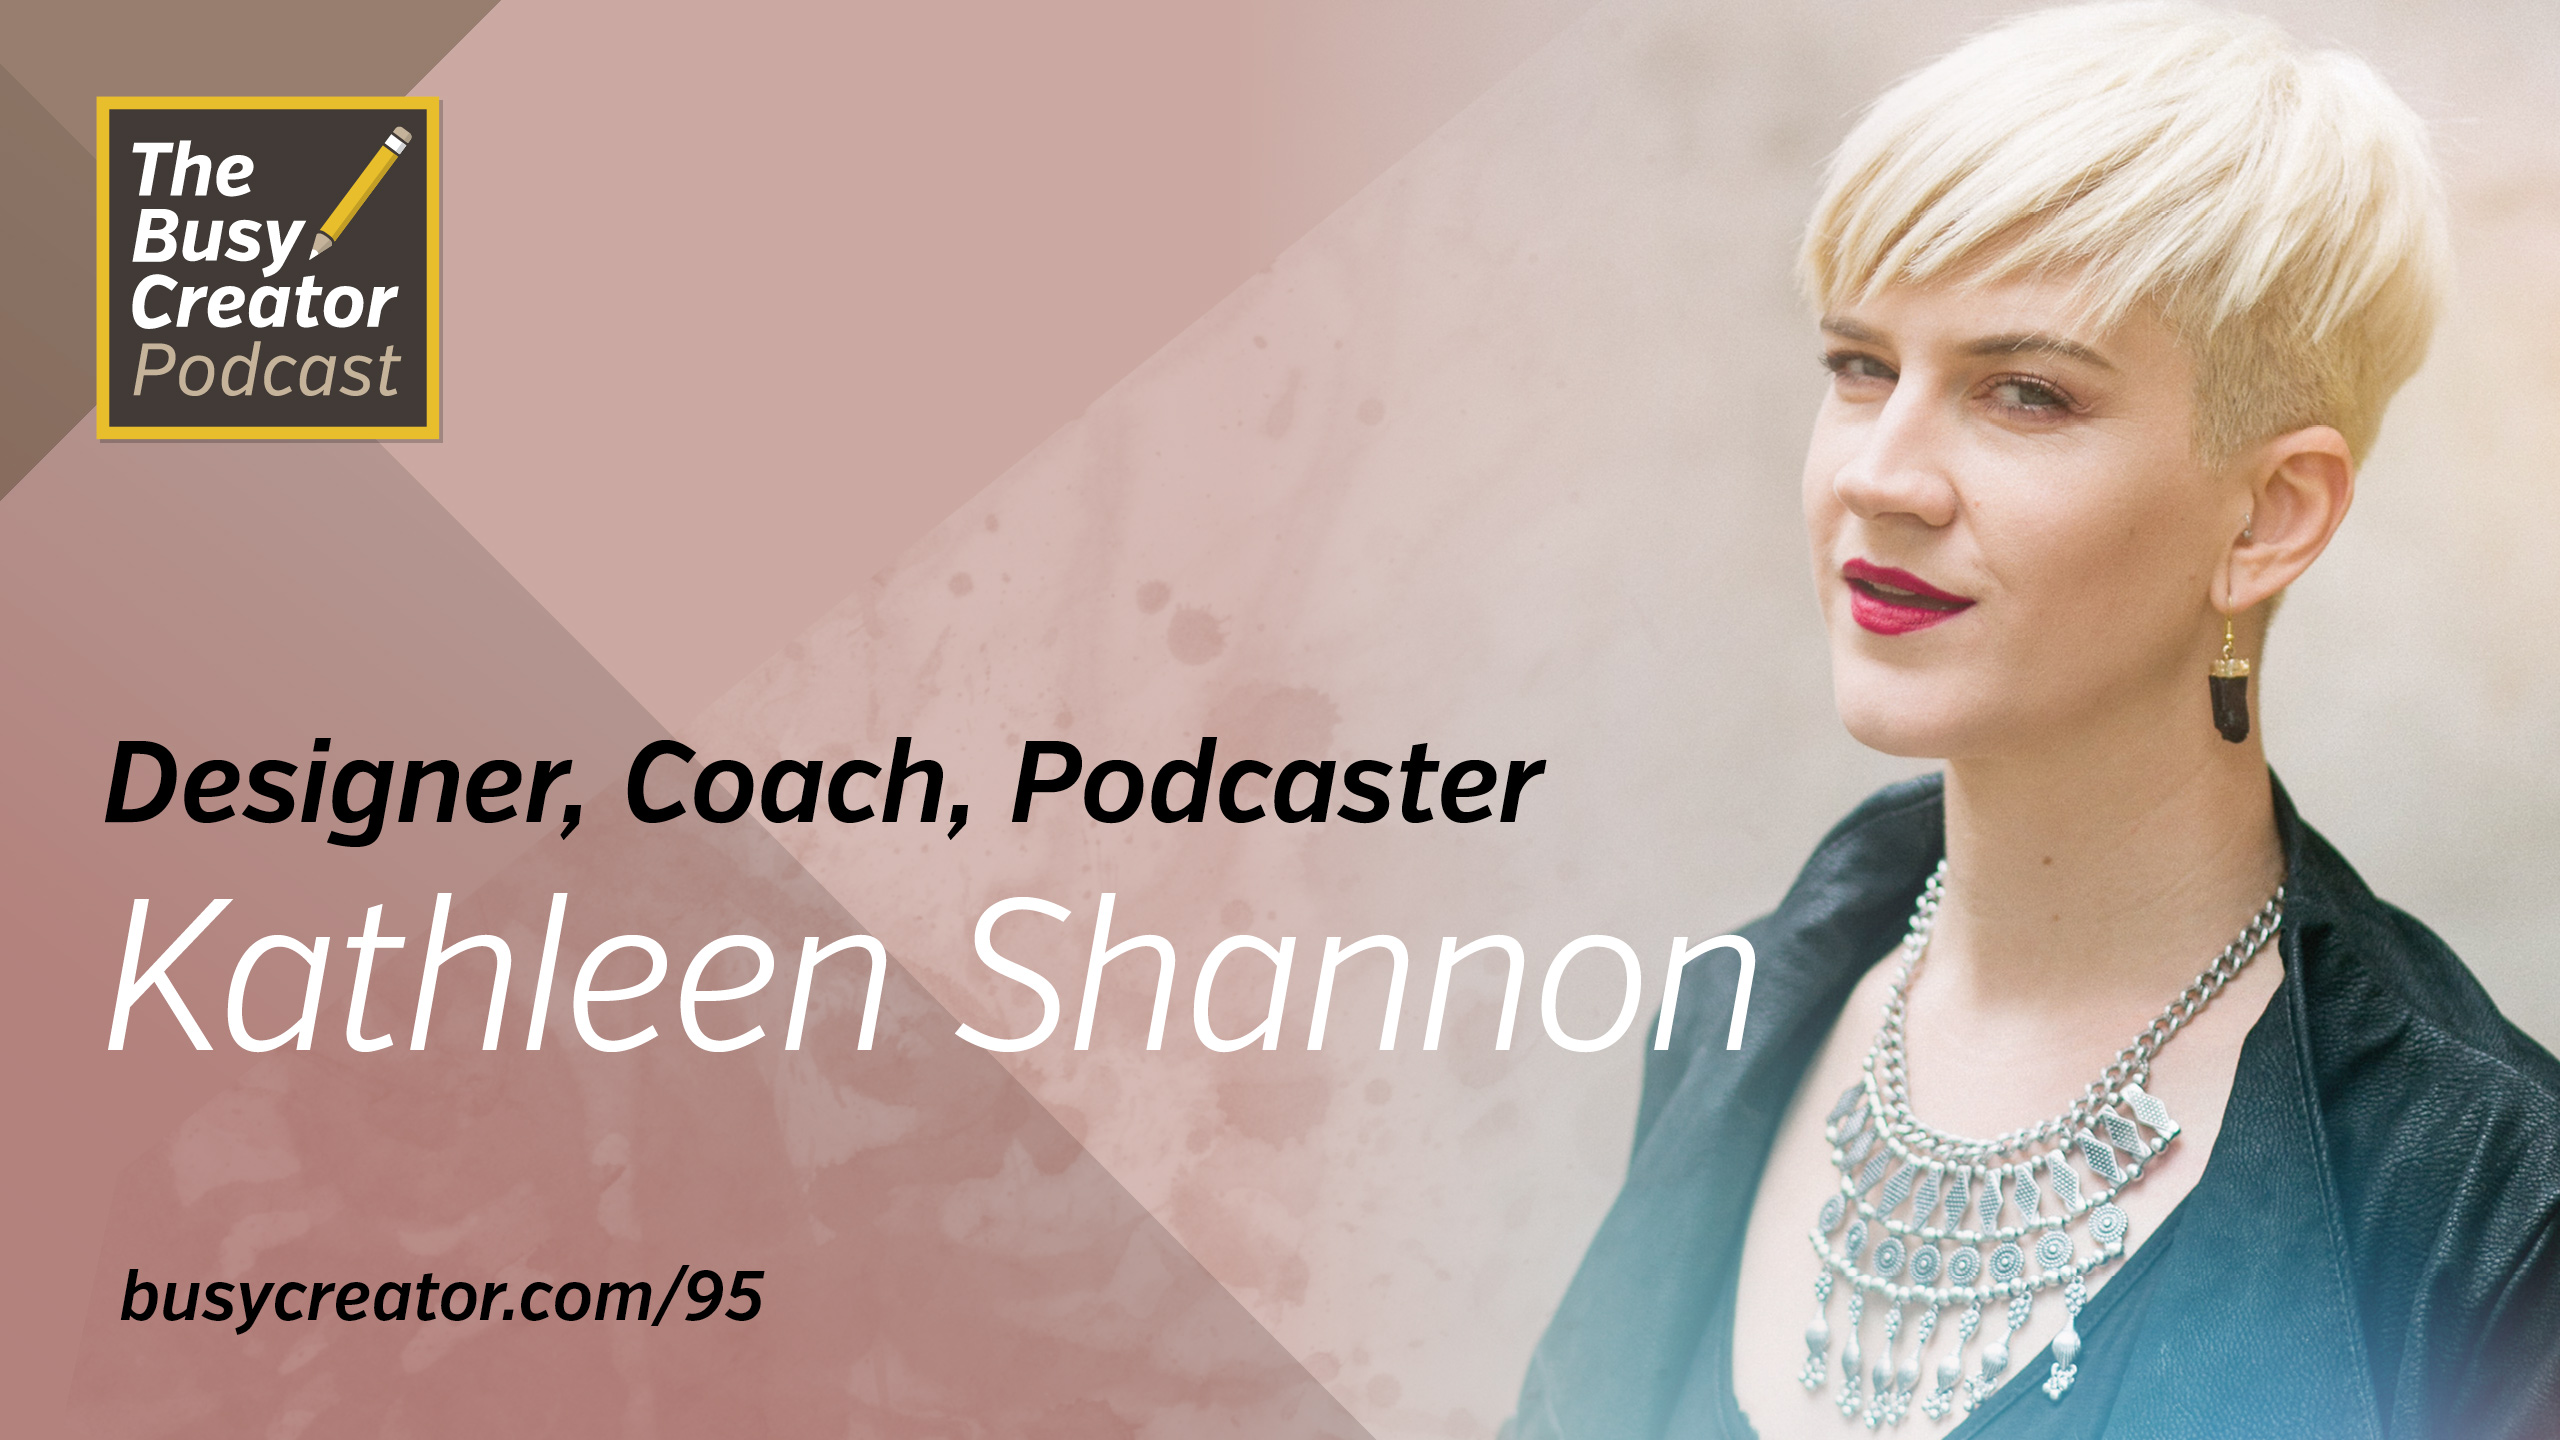 Launching an Online Community for Creative Entrepreneurs with Designer, Writer, and Podcaster Kathleen Shannon